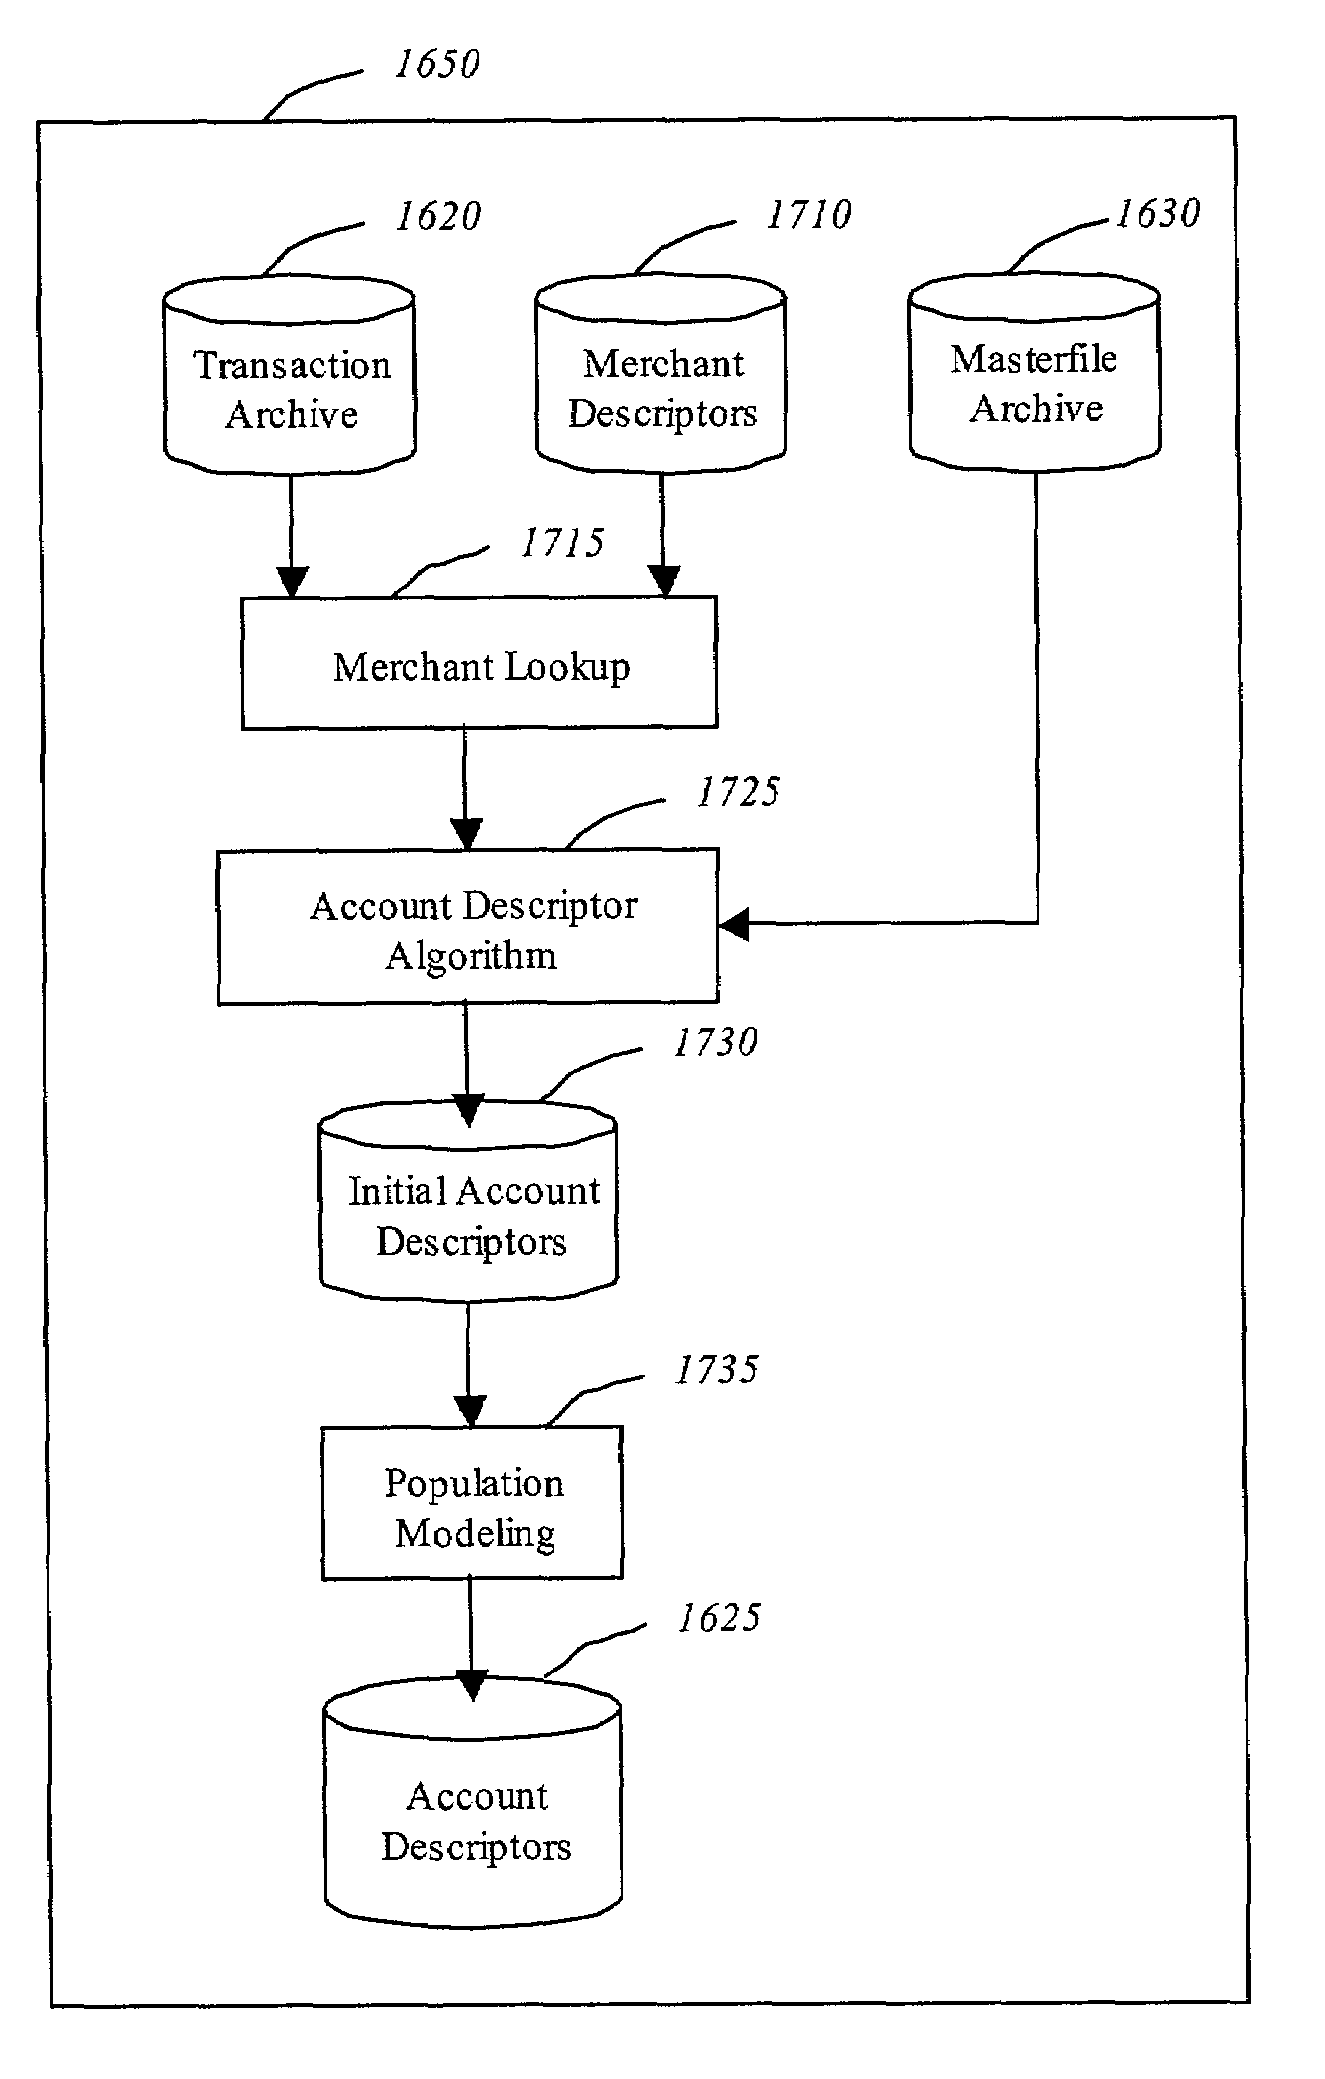 System and method for obtaining keyword descriptions of records from a large database